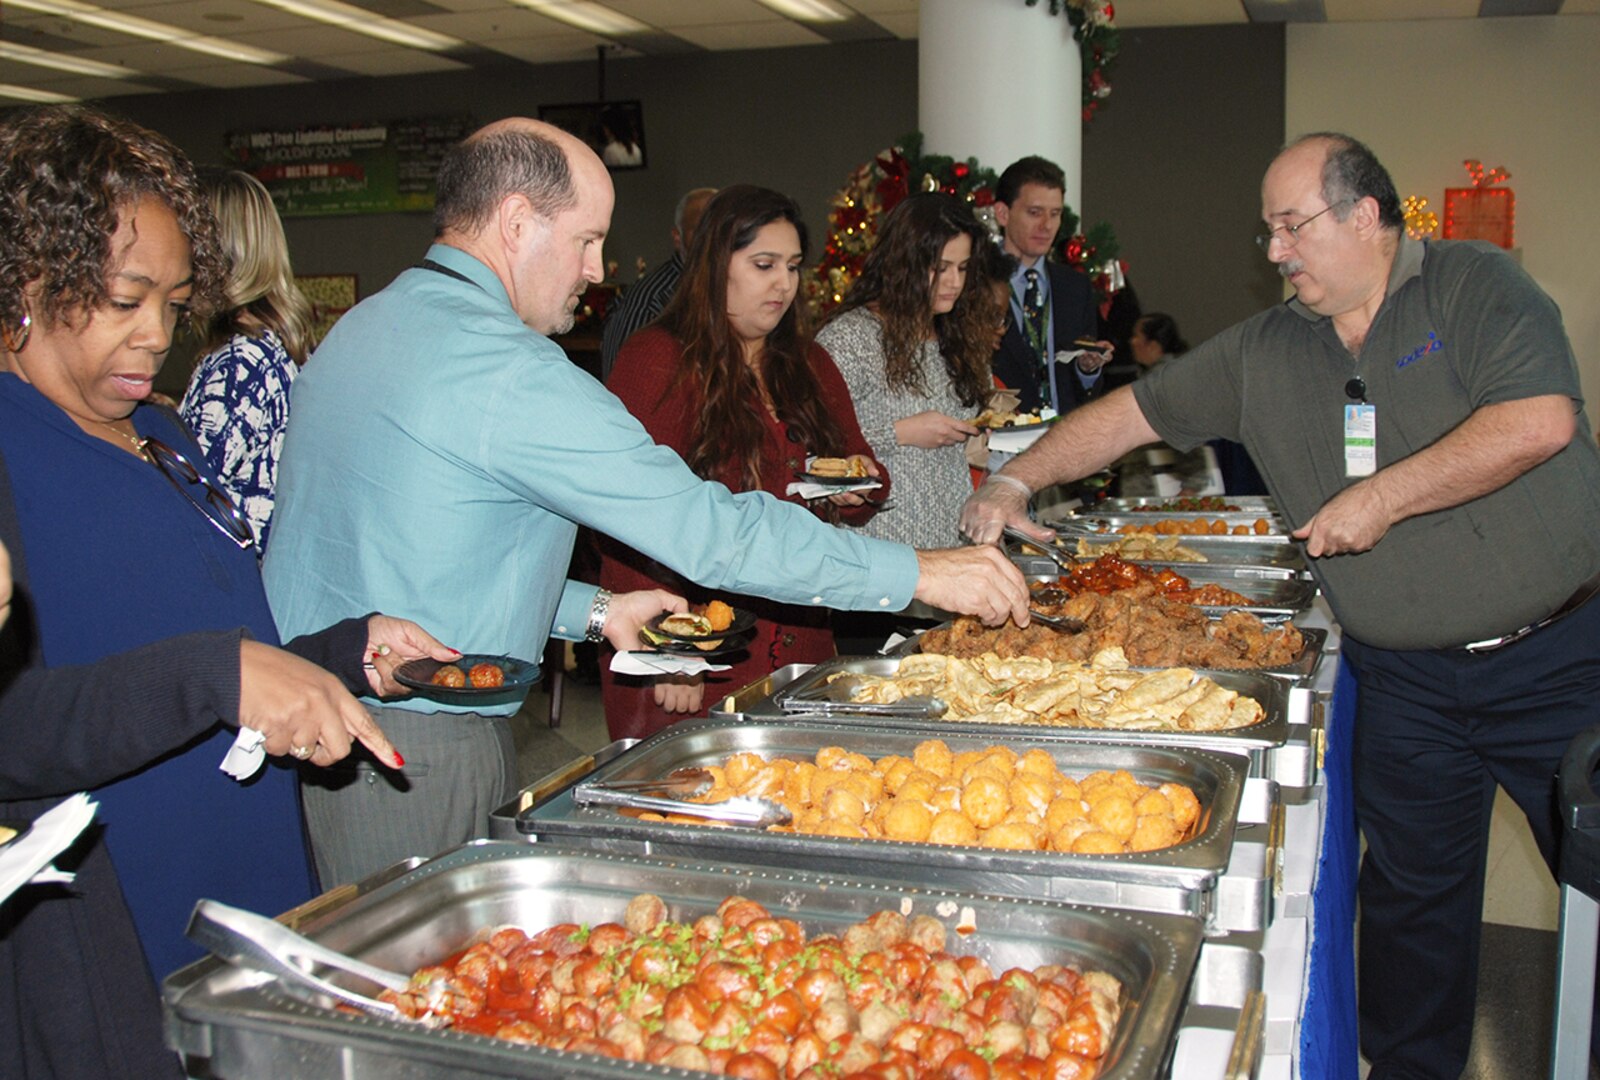 McNamara Headquarters Complex employees help themselves to free snacks at a holiday social following the annual HQC tree lighting ceremony Dec. 7.